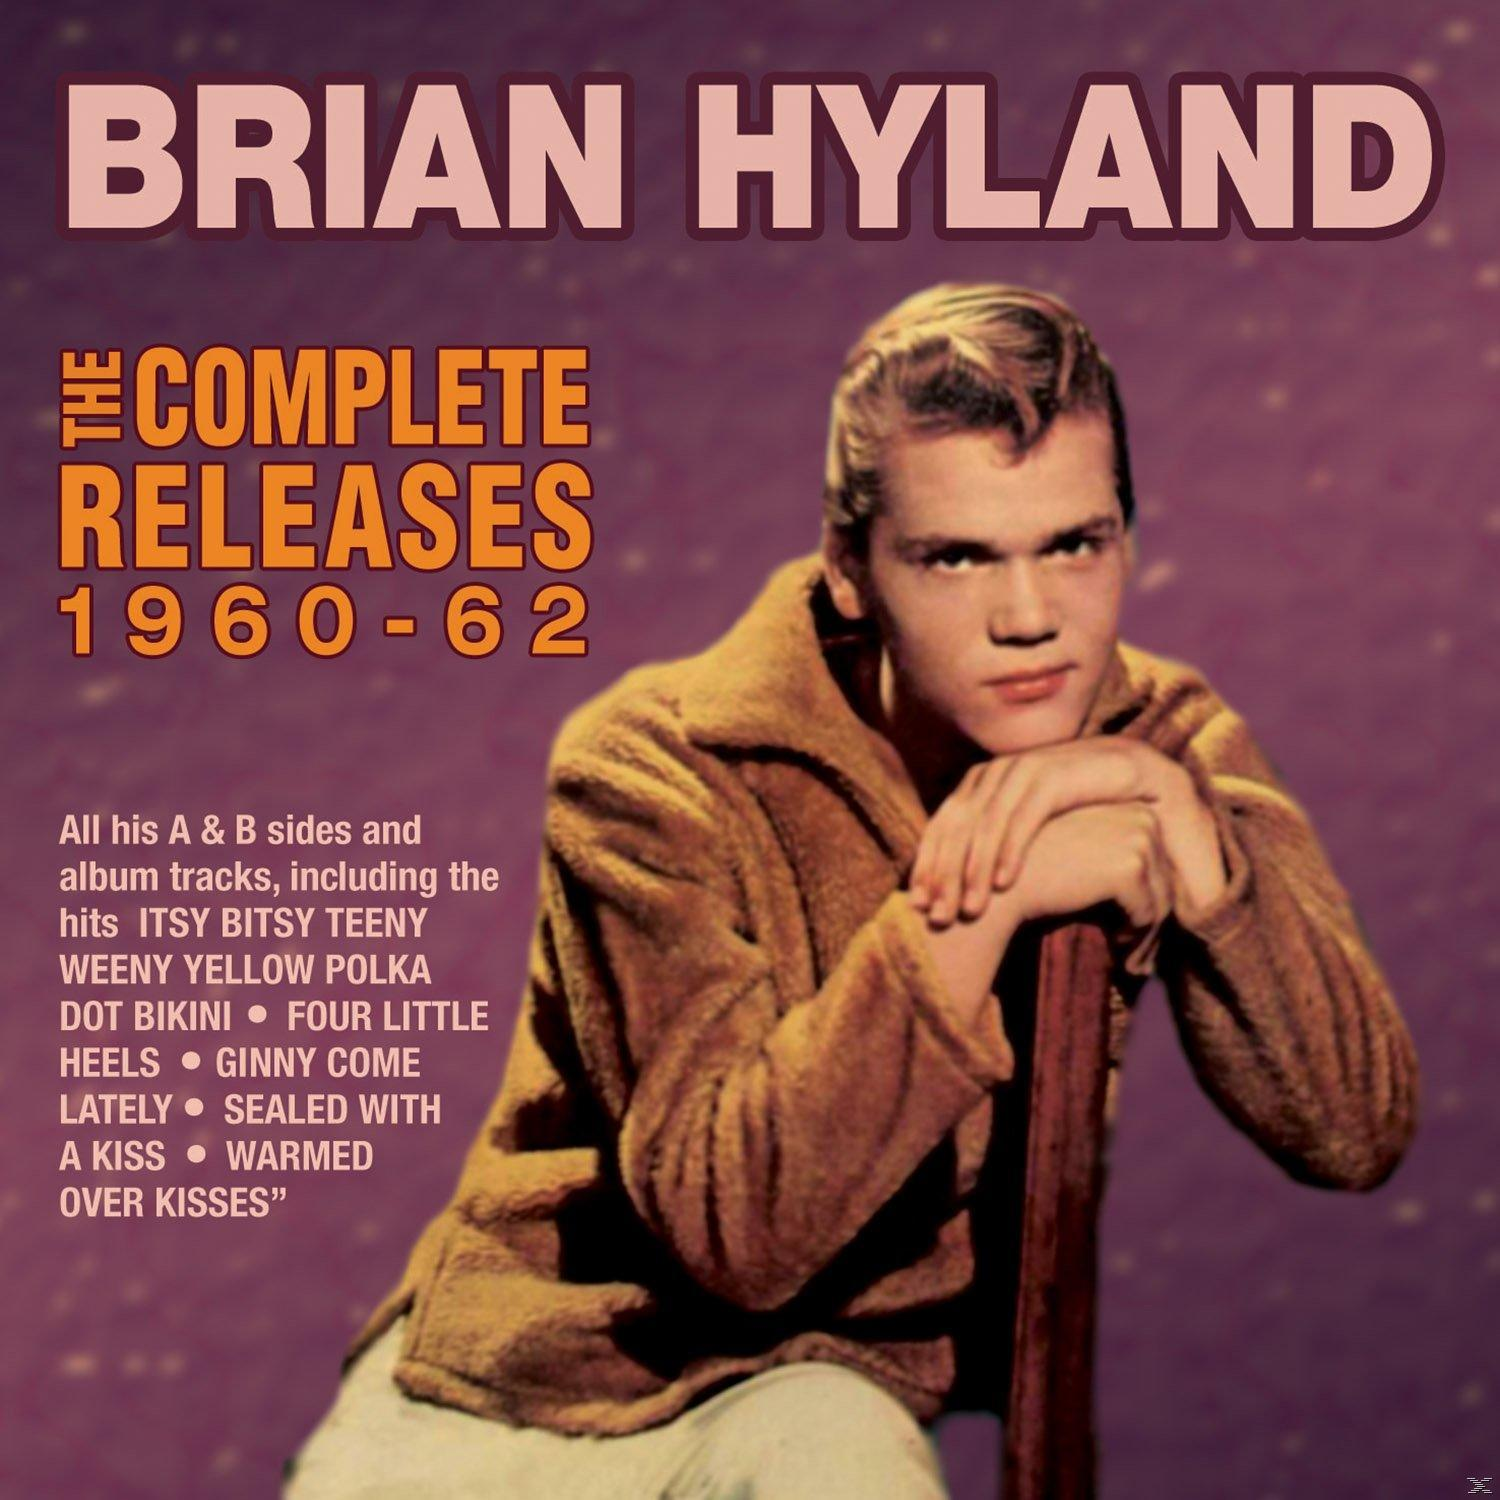 Releases - The 1960-62 (CD) - Complete Brian Hyland